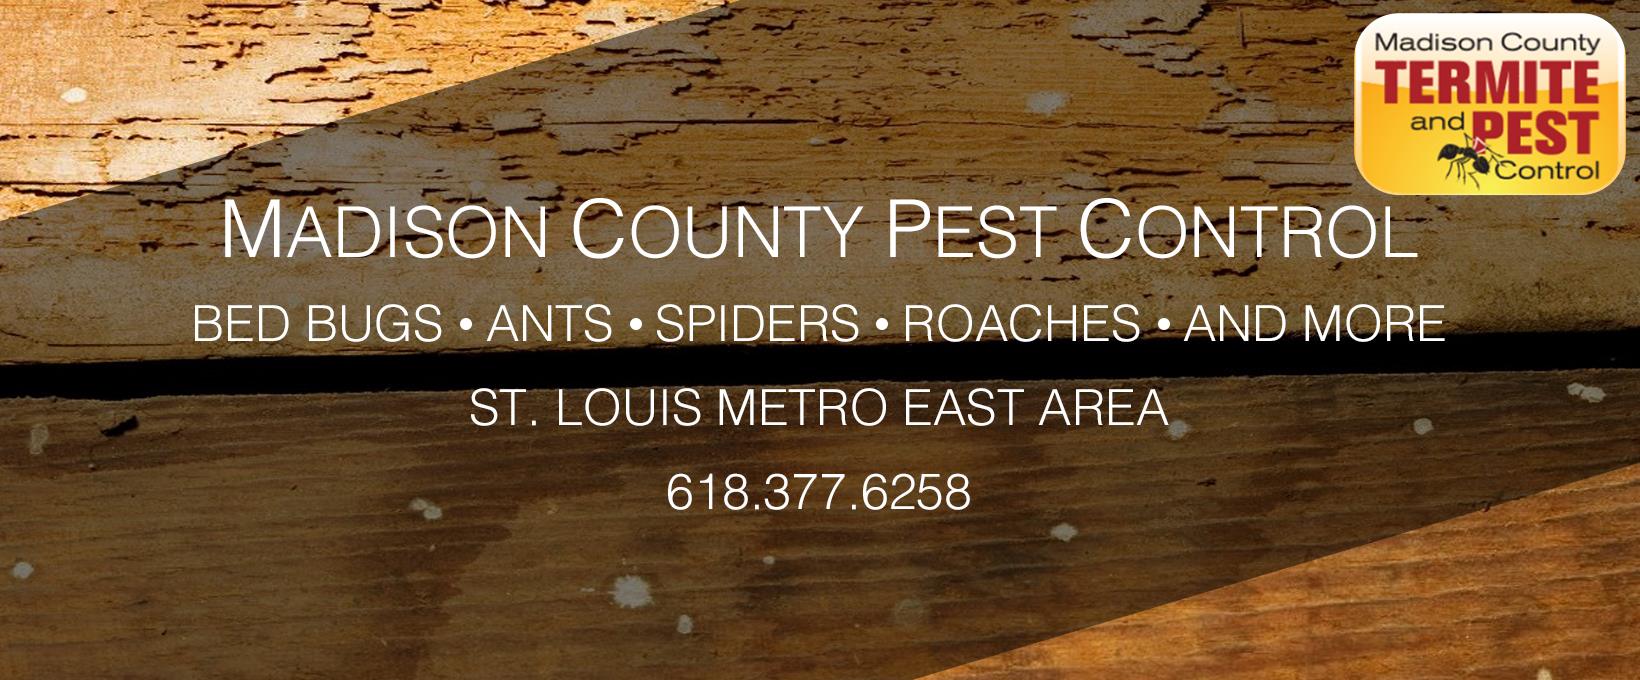 Madison County Termite and Pest Control 208 W Main St, Glen Carbon Illinois 62034